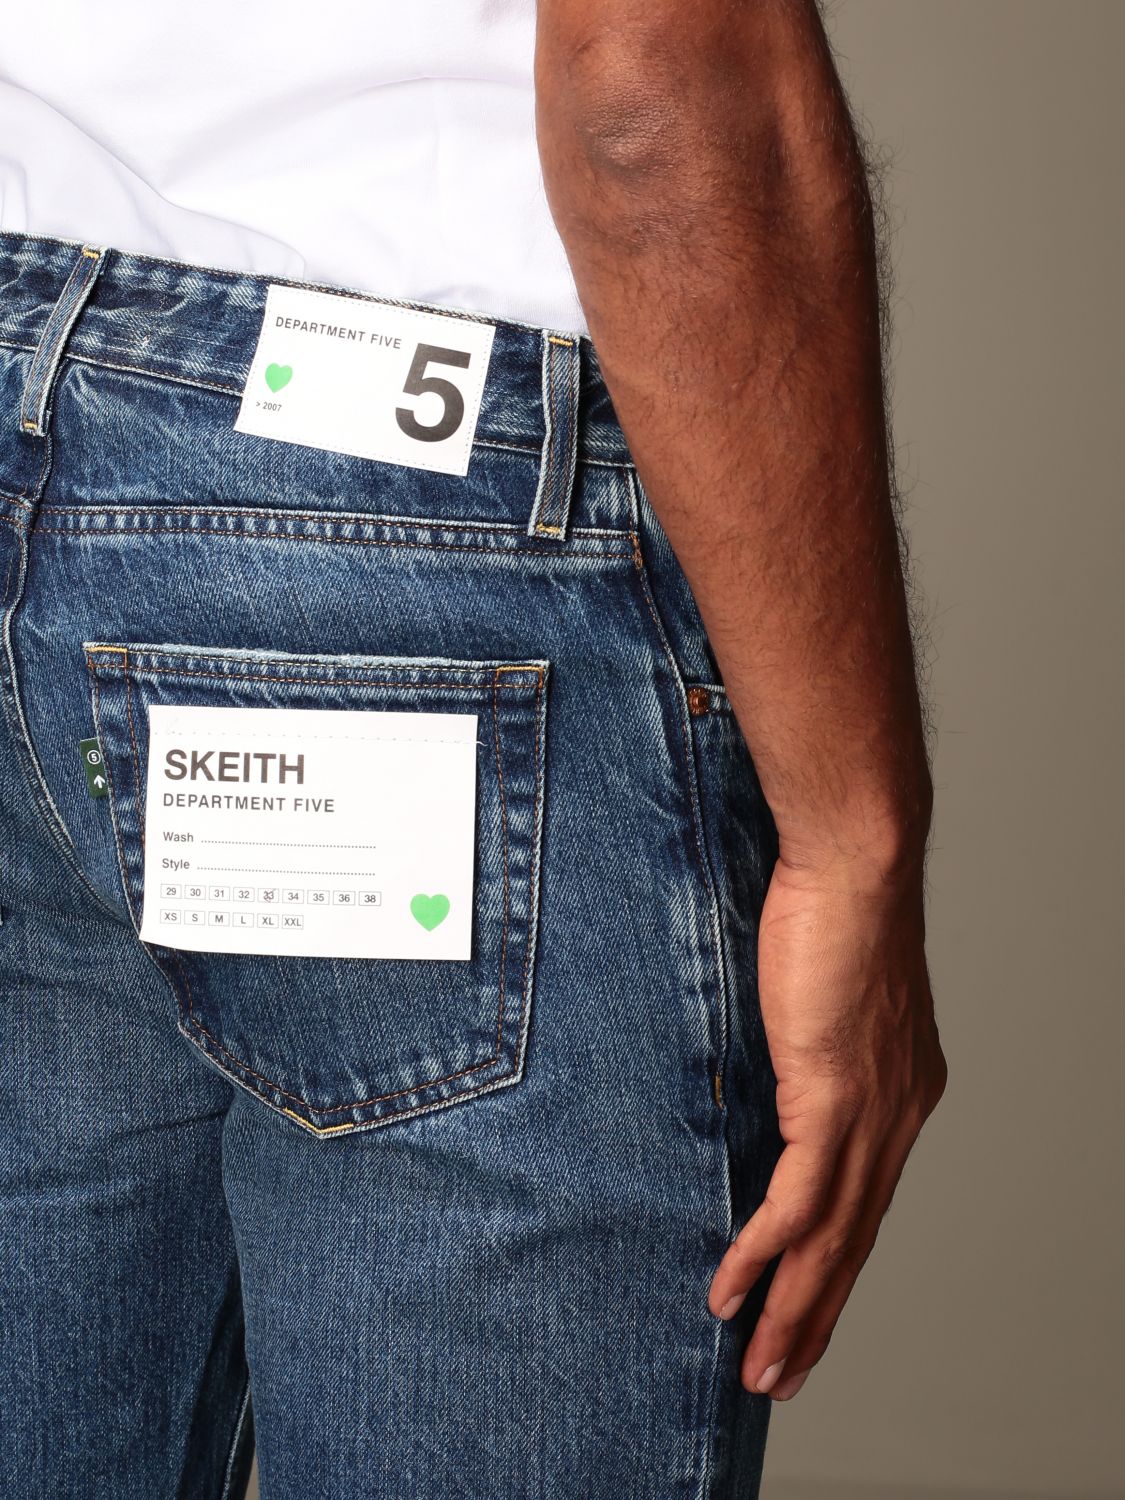 Skeith Department Five jeans in used eco-wash denim